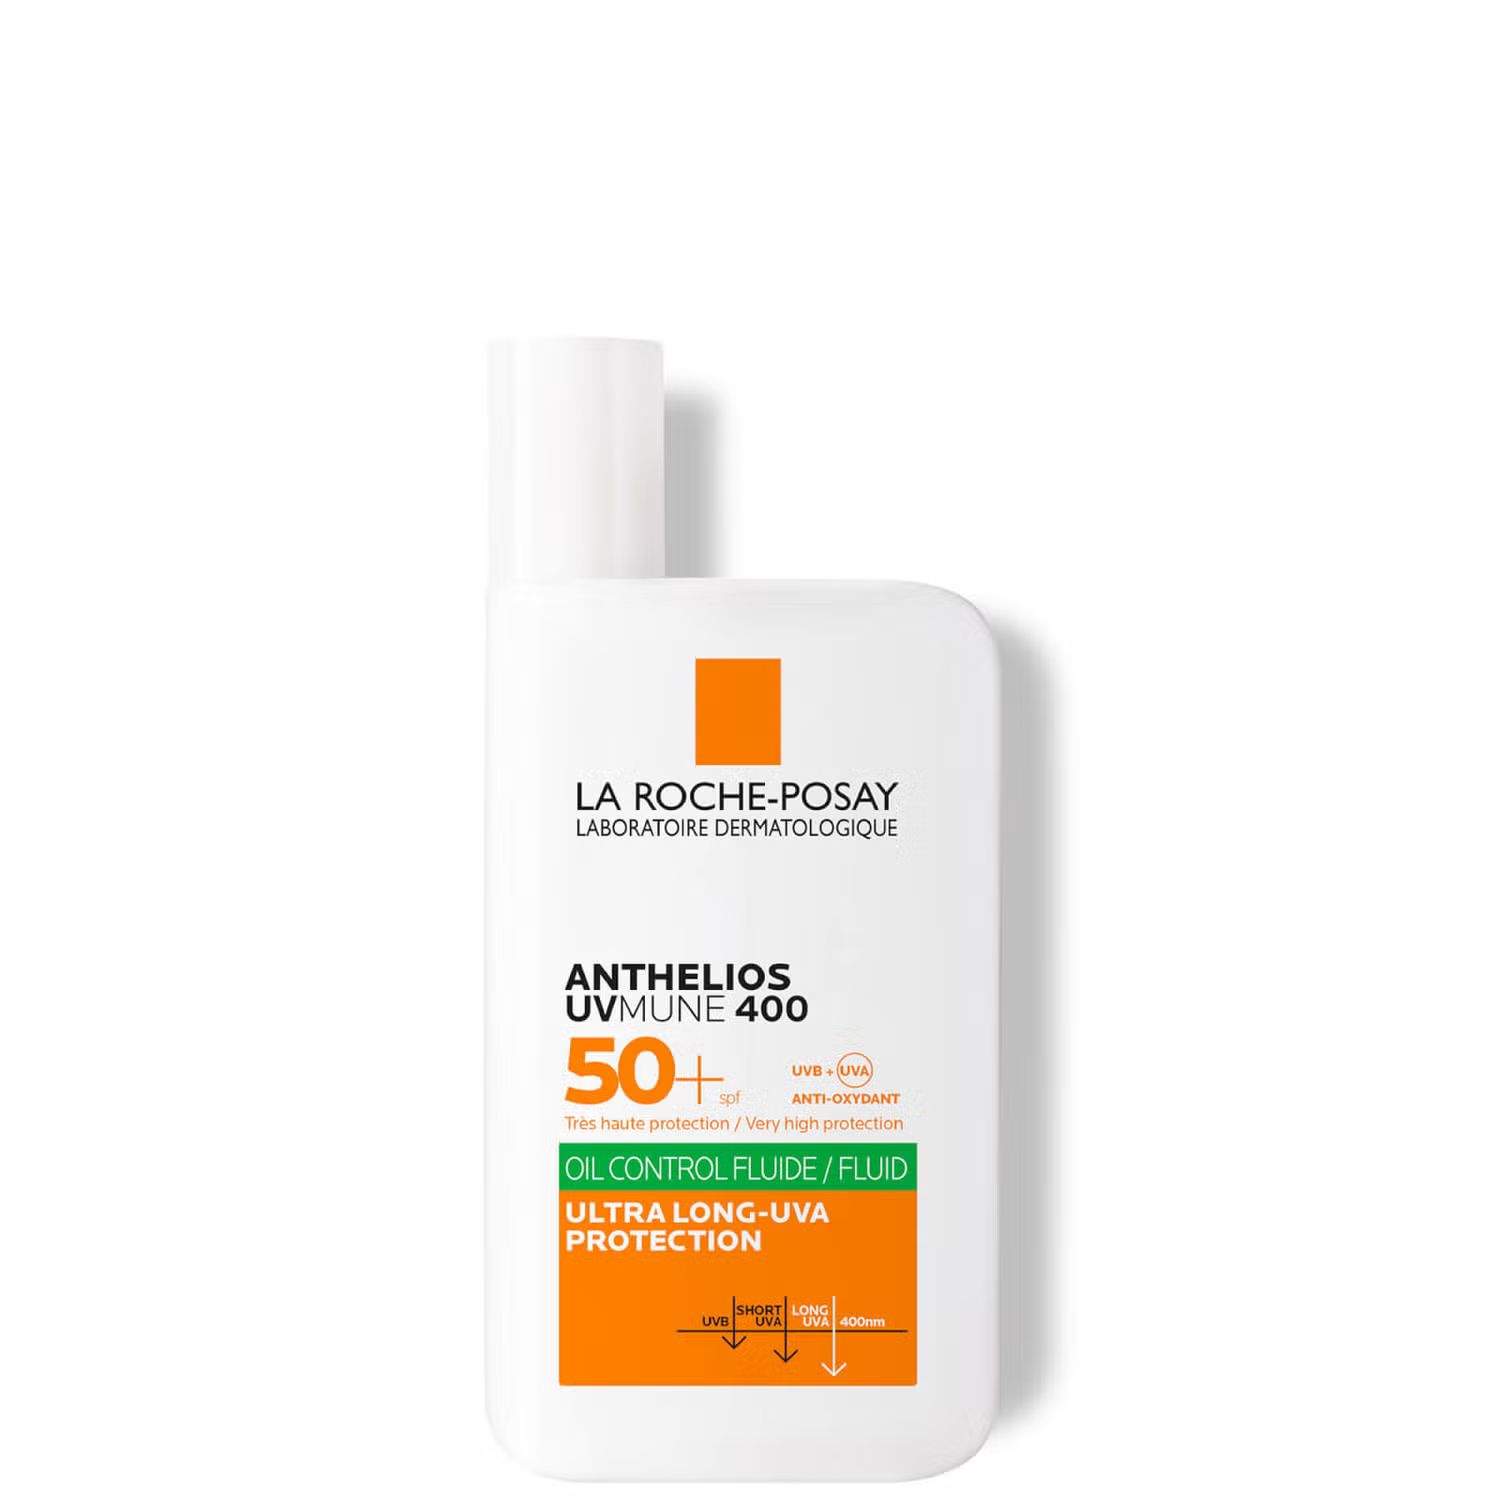 La Roche-Posay Anthelios Oil Control Fluid SPF50+ for Oily Blemish-Prone Skin 50ml | Look Fantastic (UK)